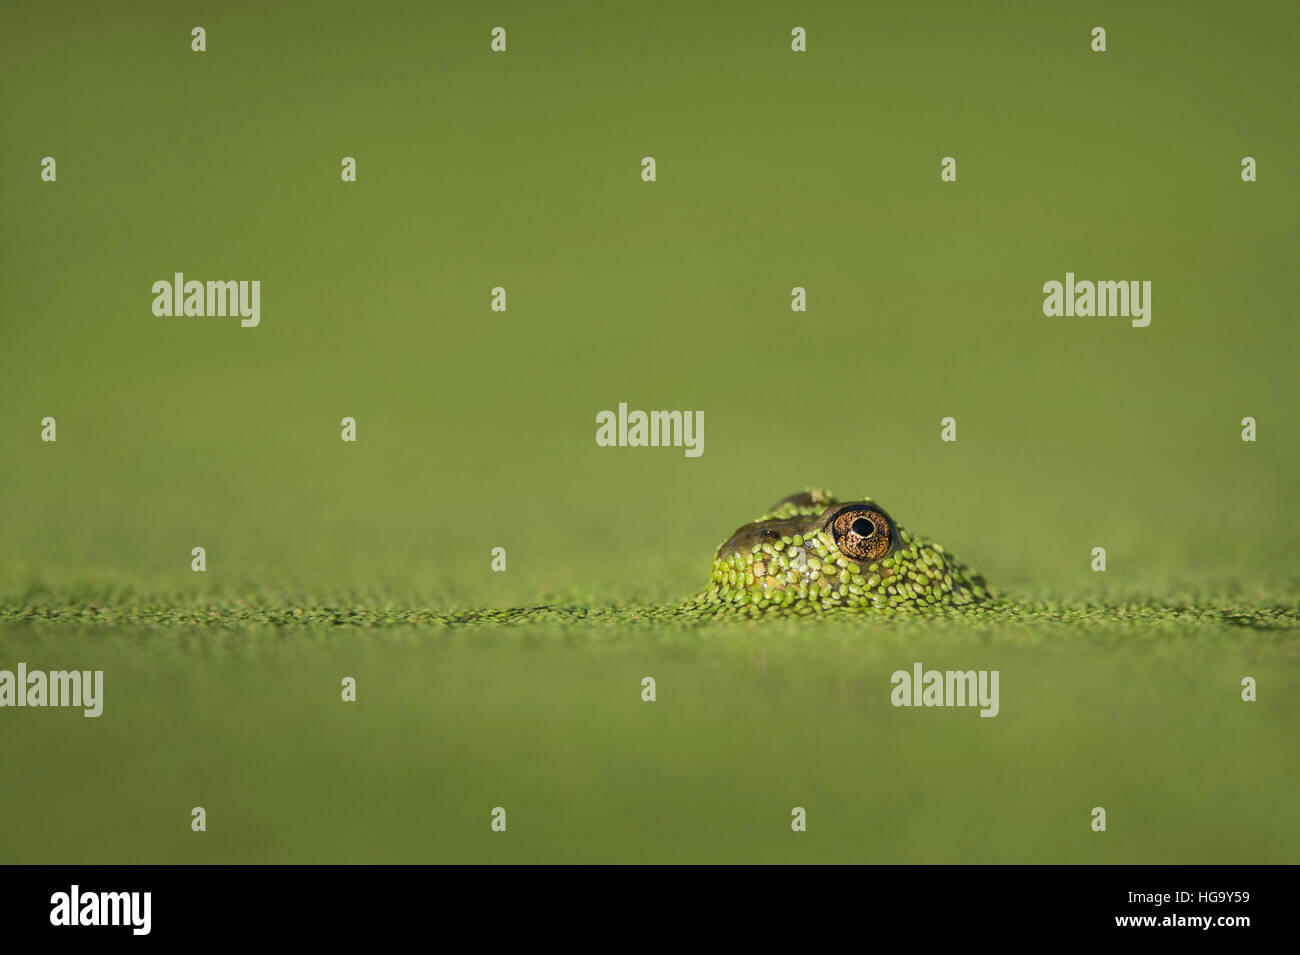 A small frog surfaced through the bright green duckweed to reveal its large eye. Stock Photo